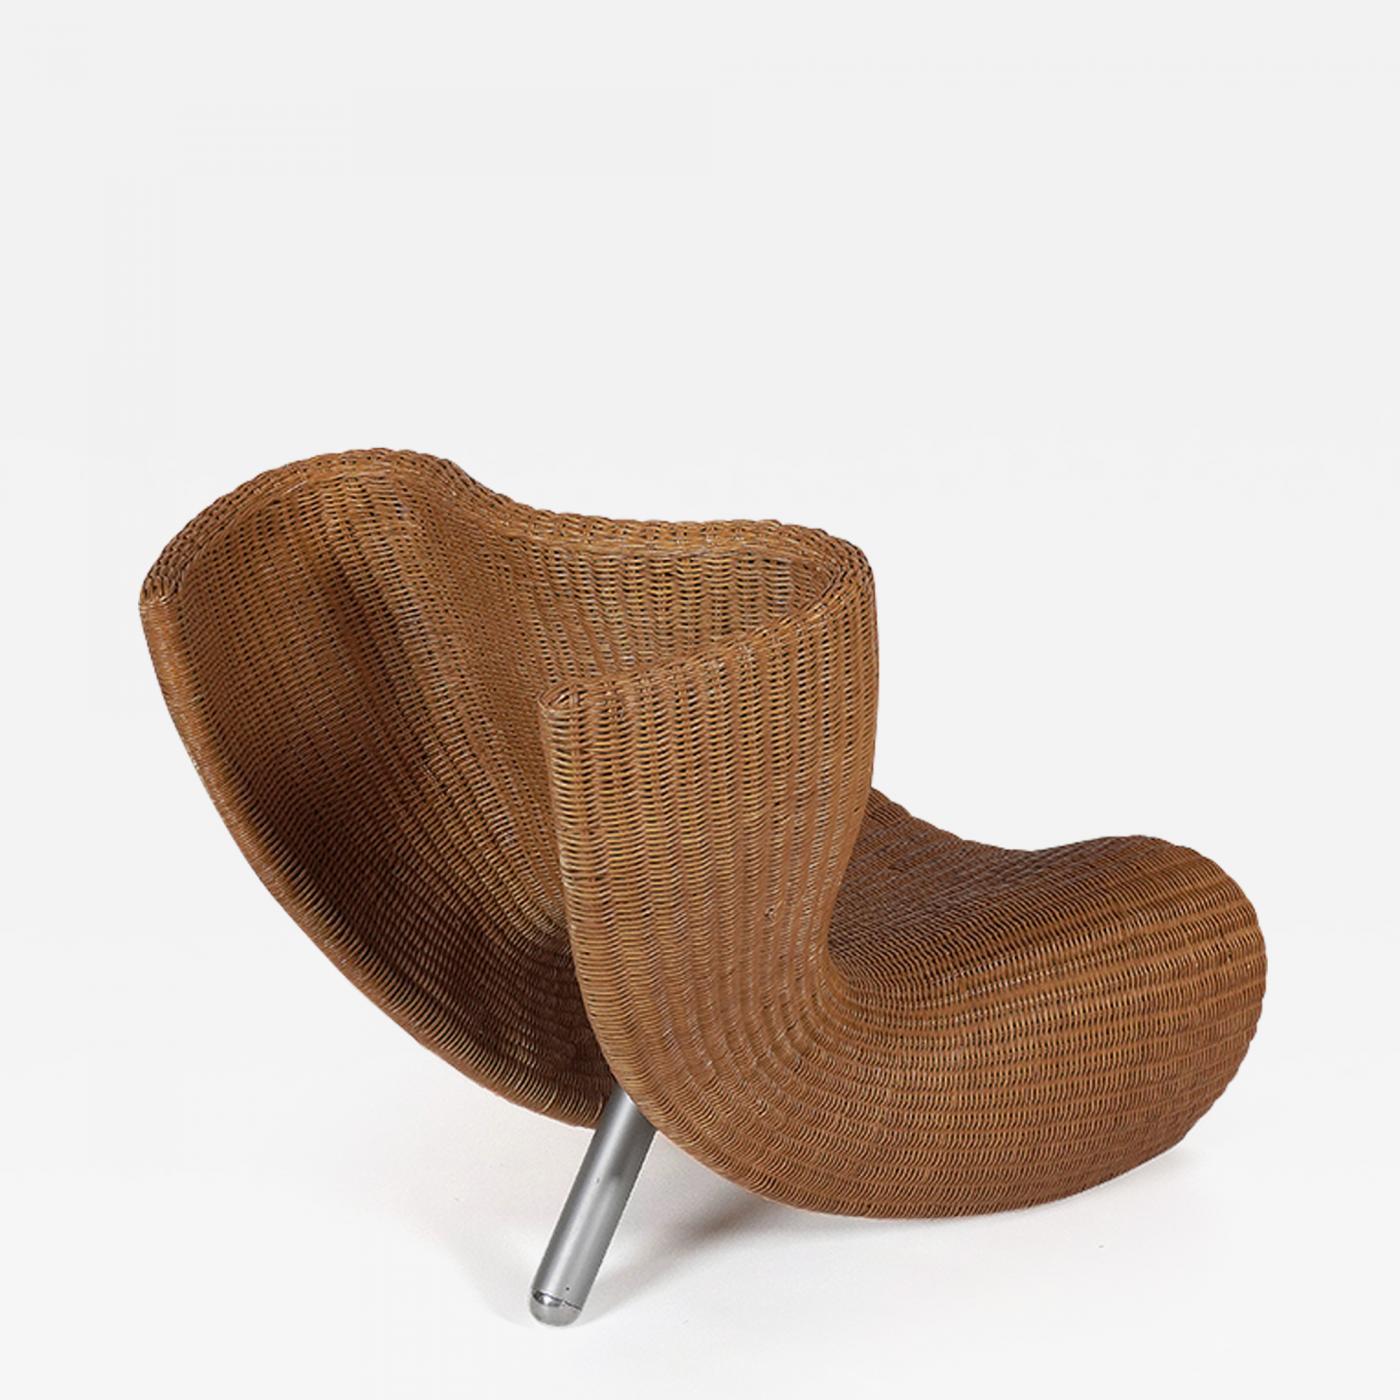 Mark Newson on his early career including the Lockheed Lounge chair